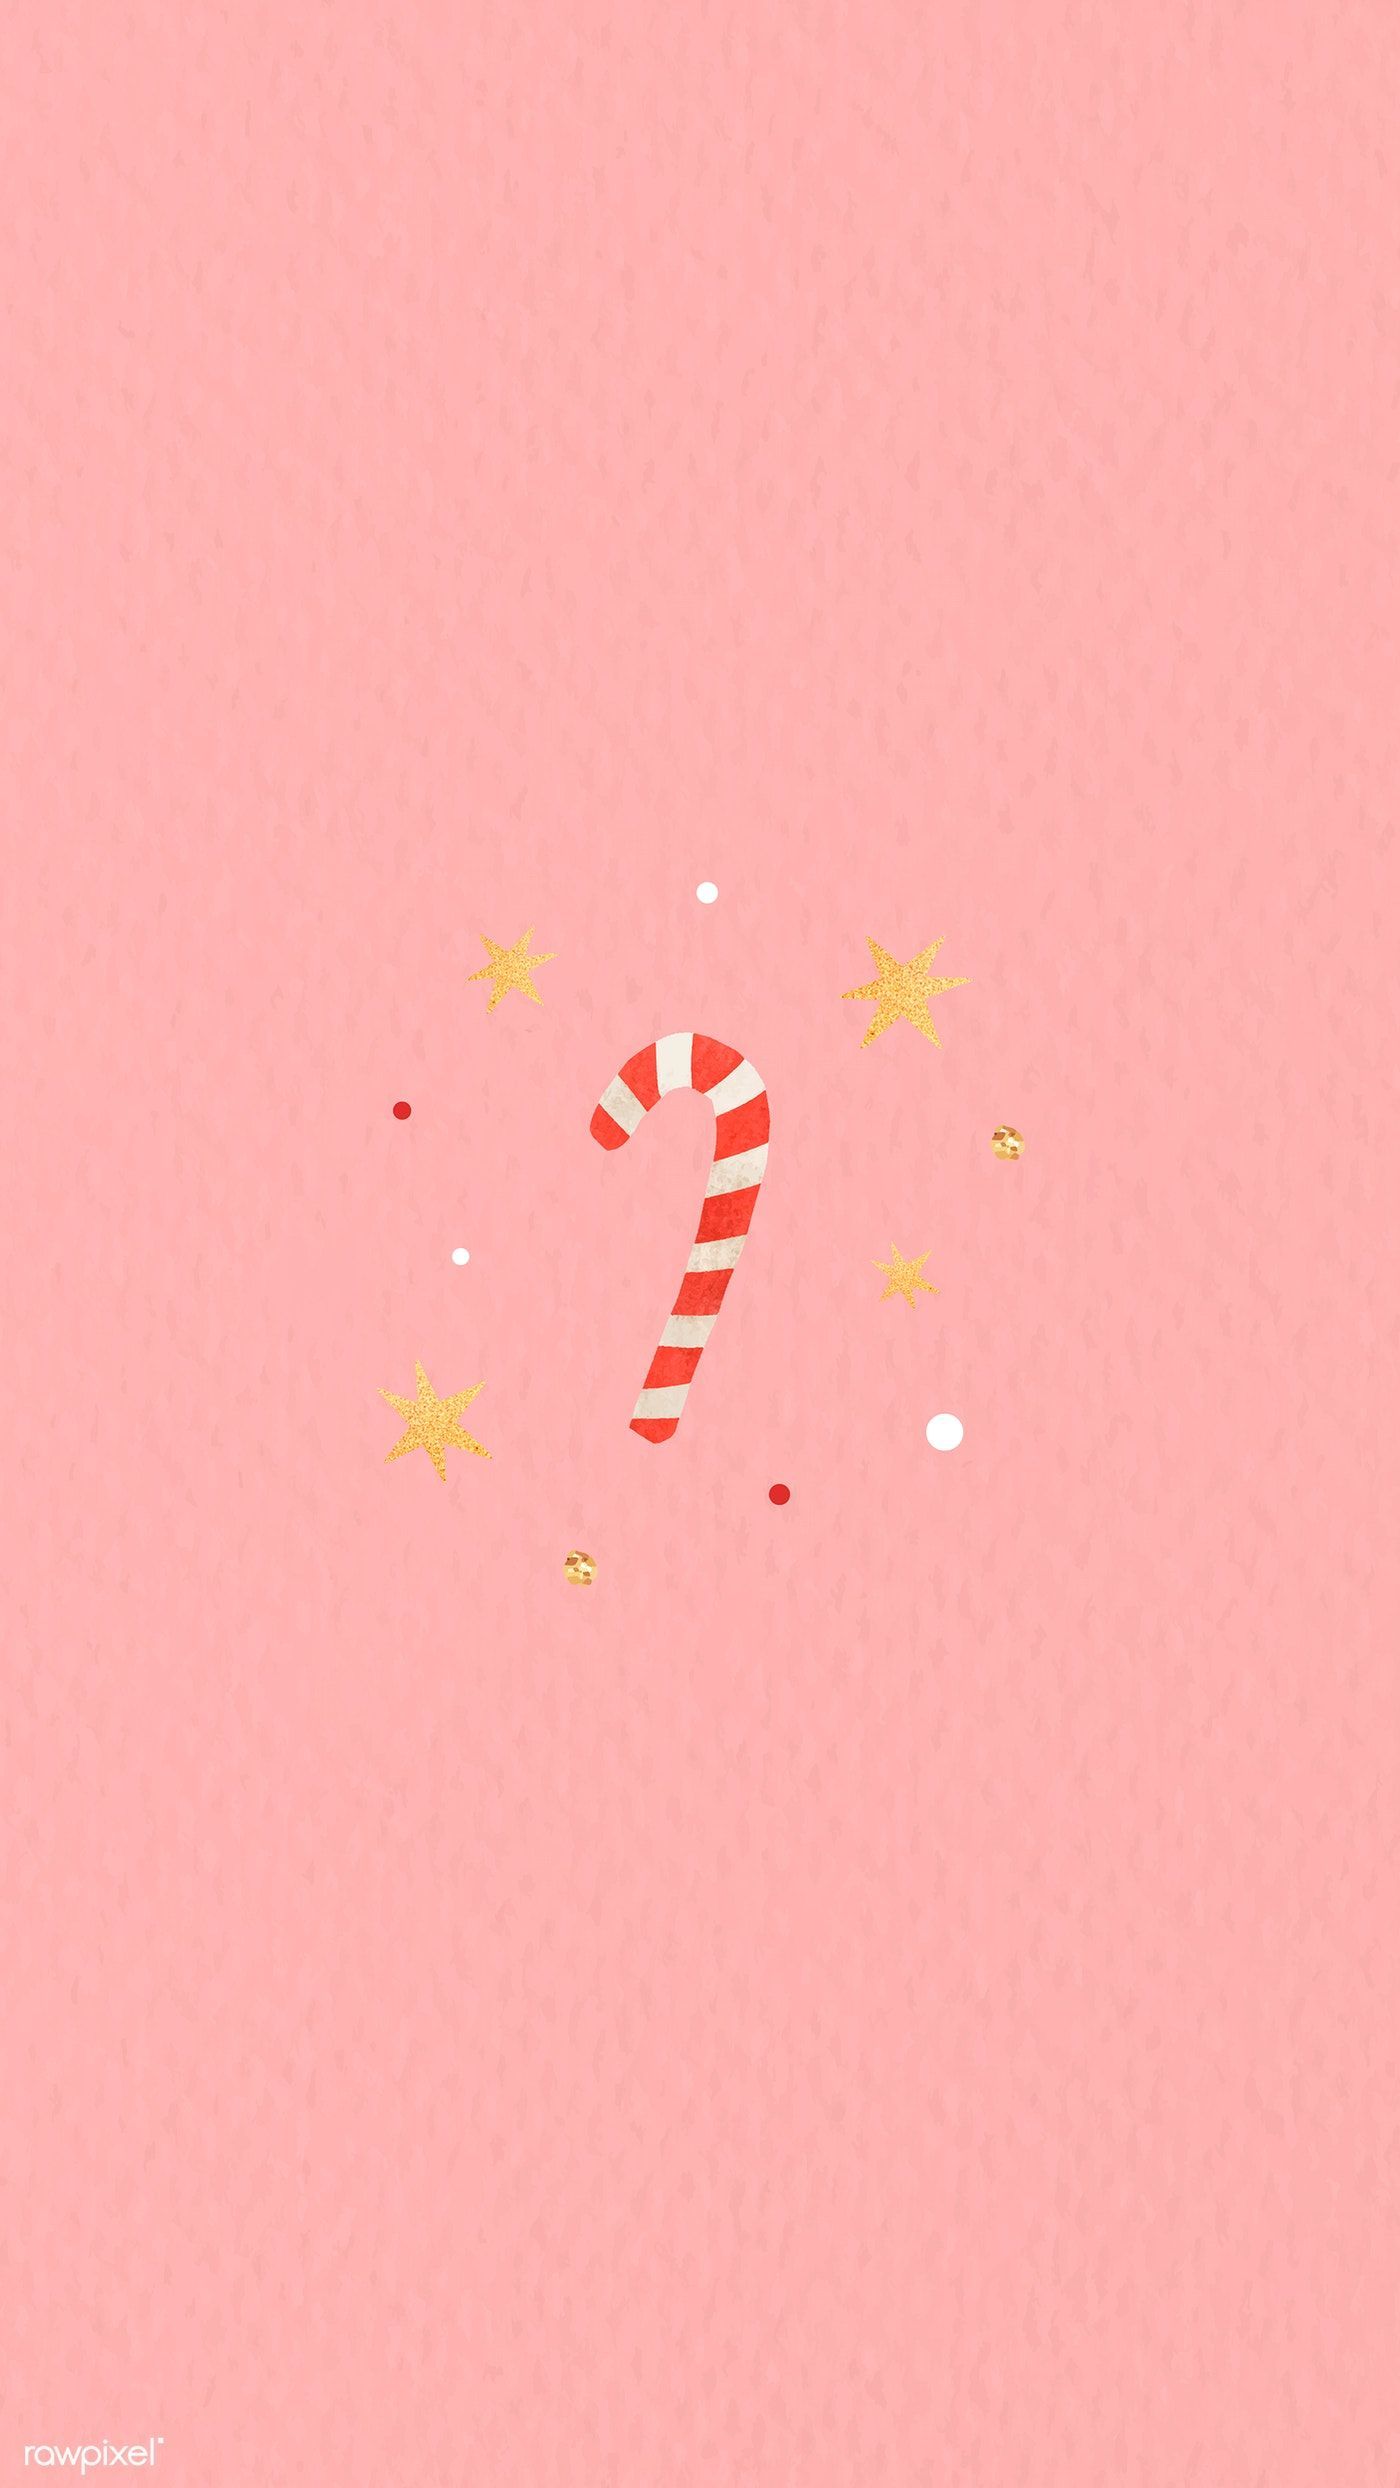 Download premium illustration of Cute candy cane mobile phone